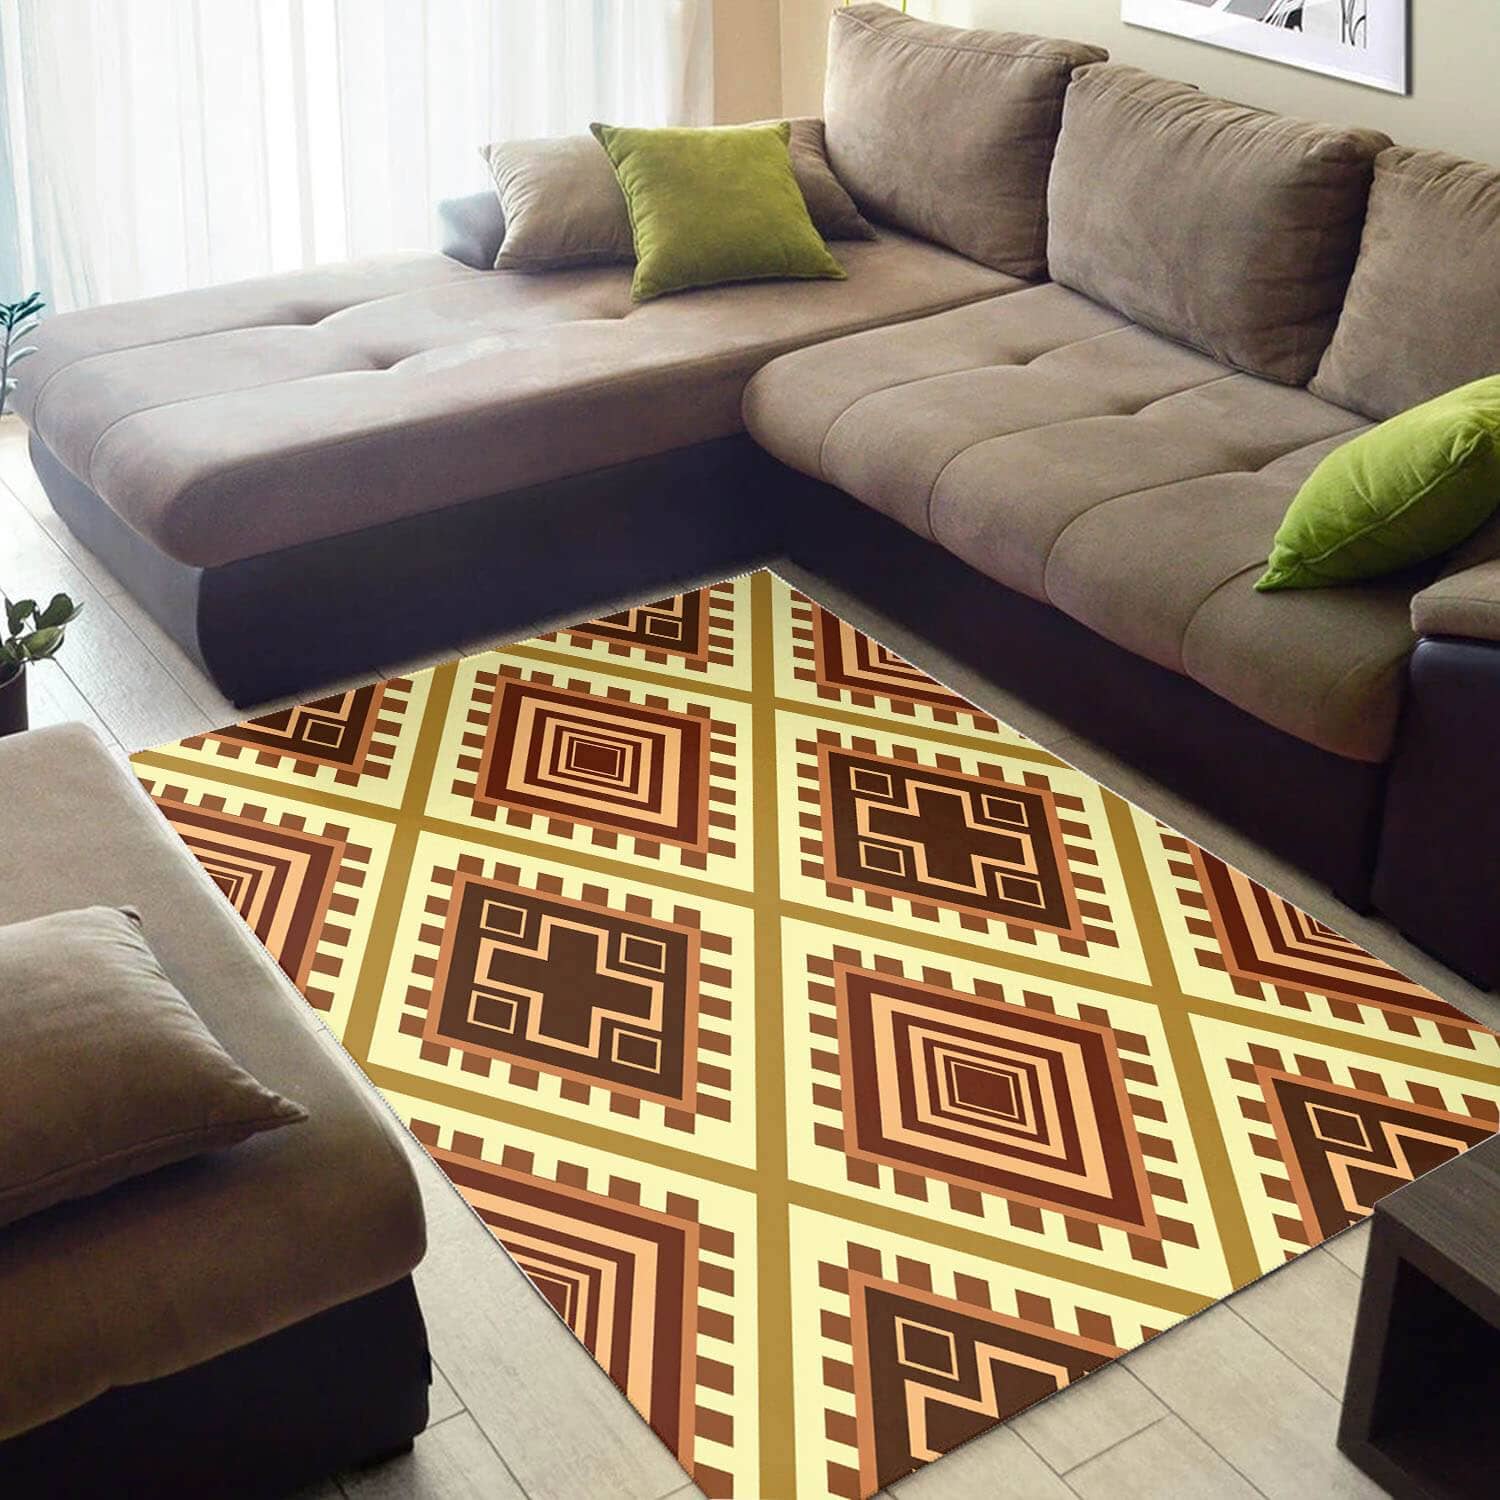 Cool African Style Holiday Afro American Ethnic Seamless Pattern Large Rug